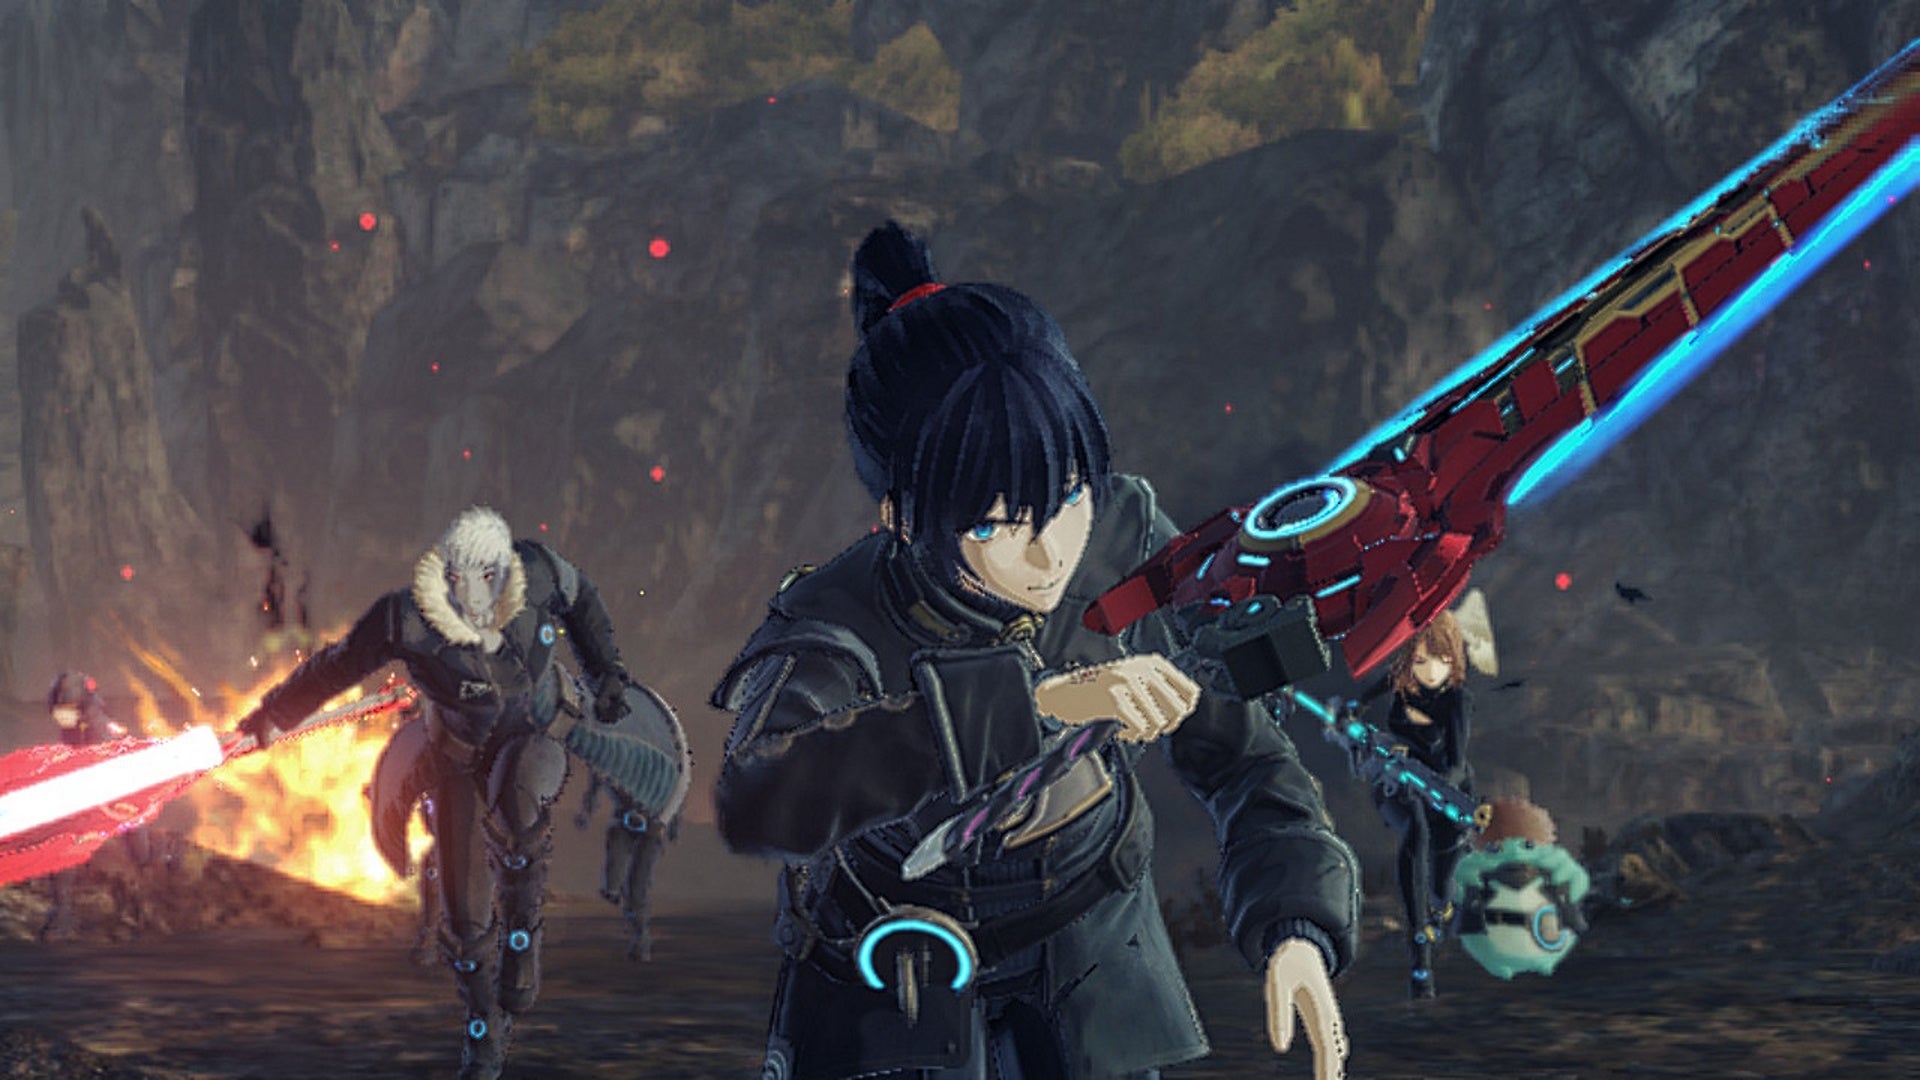 Xenoblade Chronicles 3 classes: A party of diverse classes heads into combat